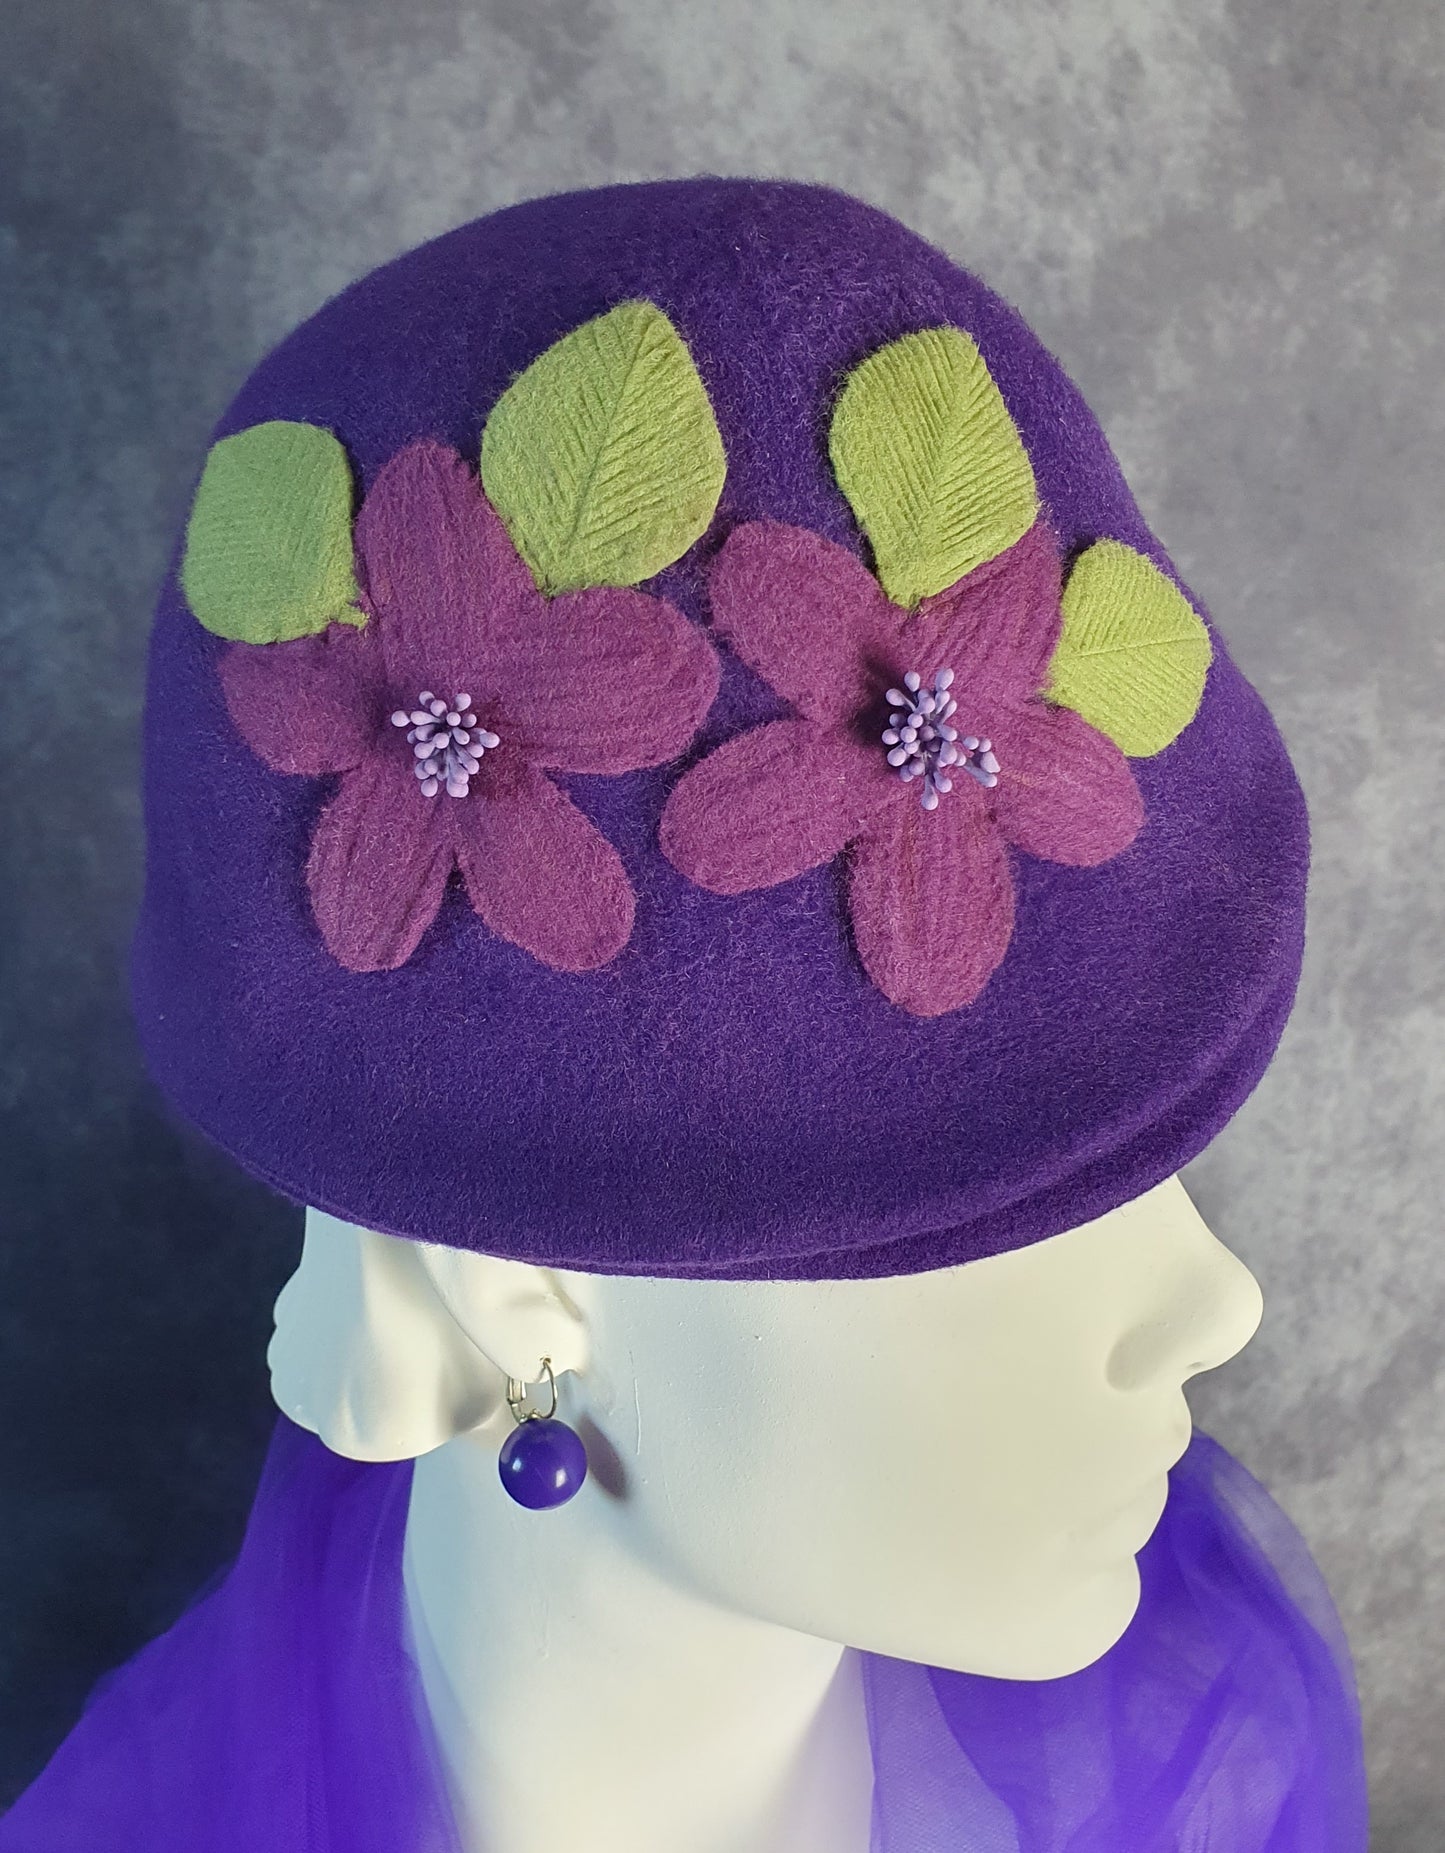 Handmade Purple Felt Women's Cap with Flowers and Leaves - Vintage Style for Fall and Winter